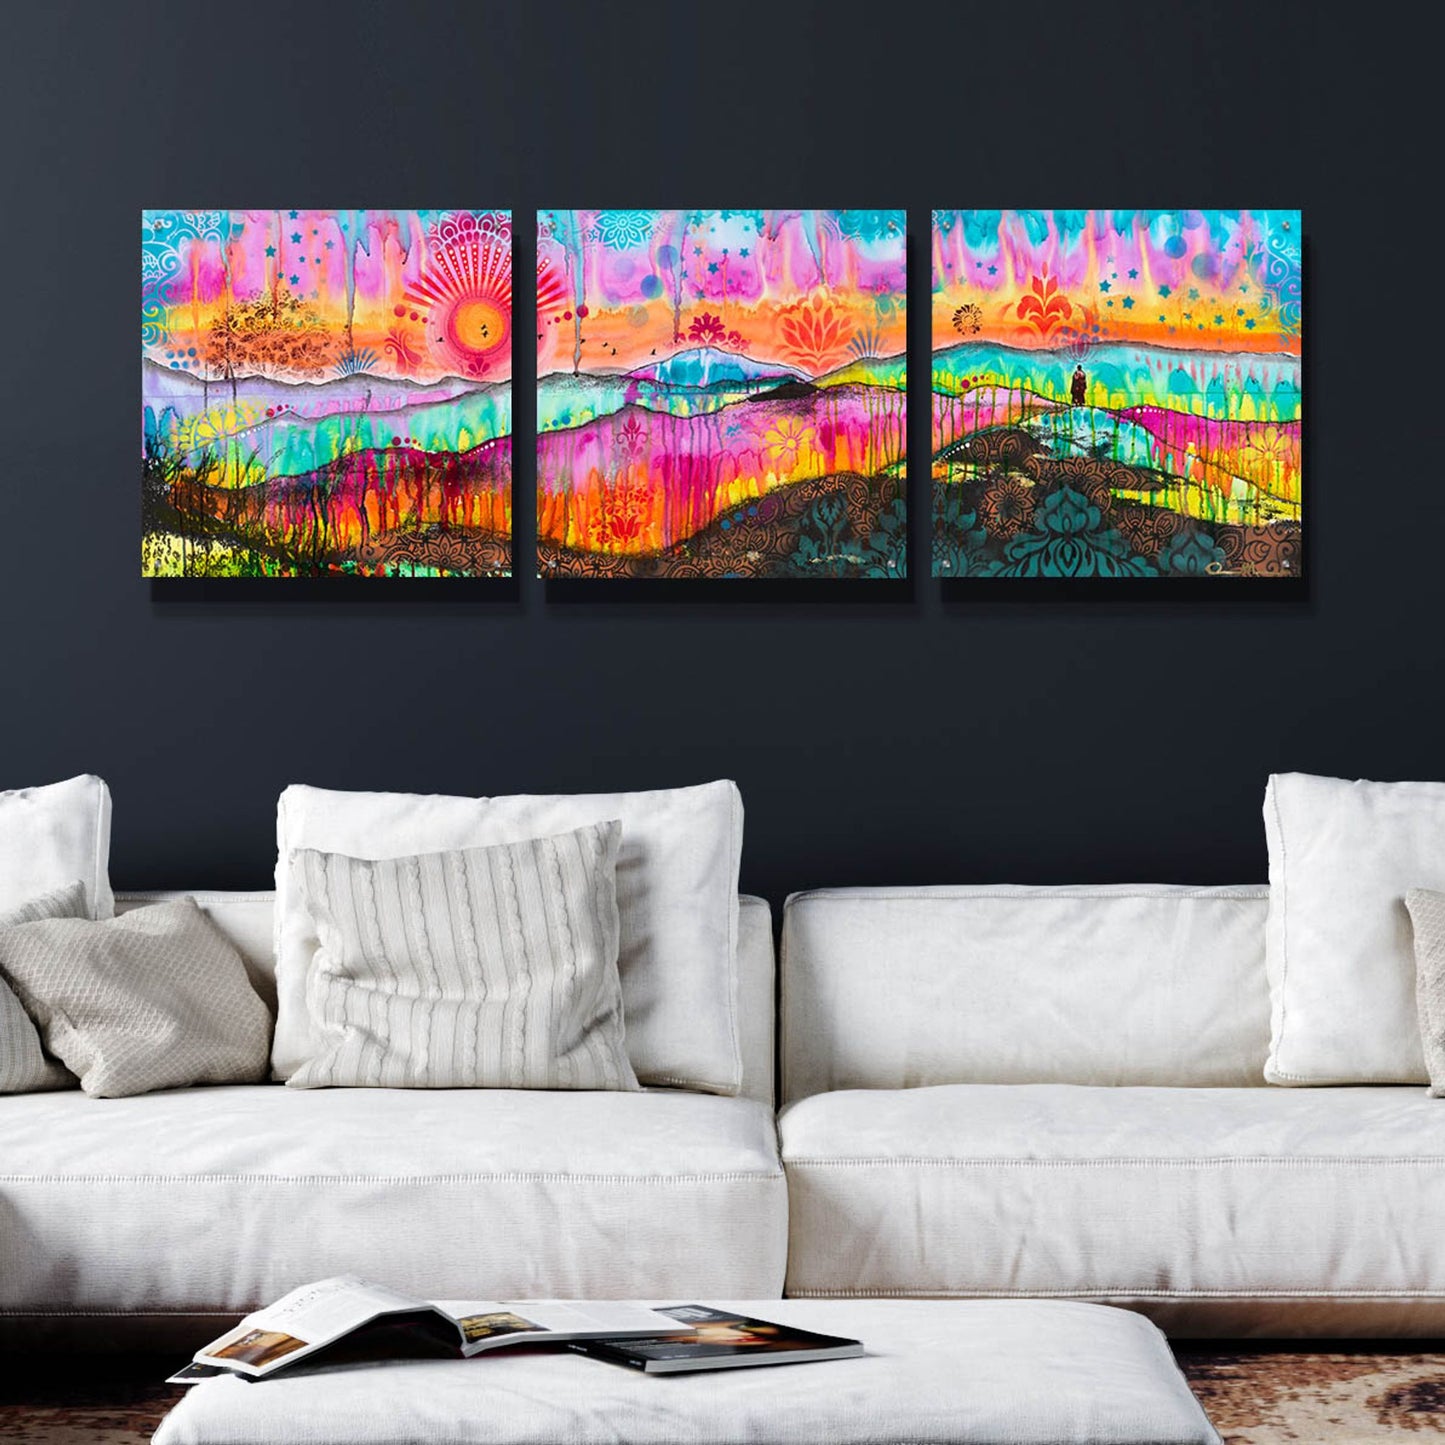 Epic Art 'The Wandering Monk' by Dean Russo, Acrylic Glass Wall Art, 3 Piece Set,72x24